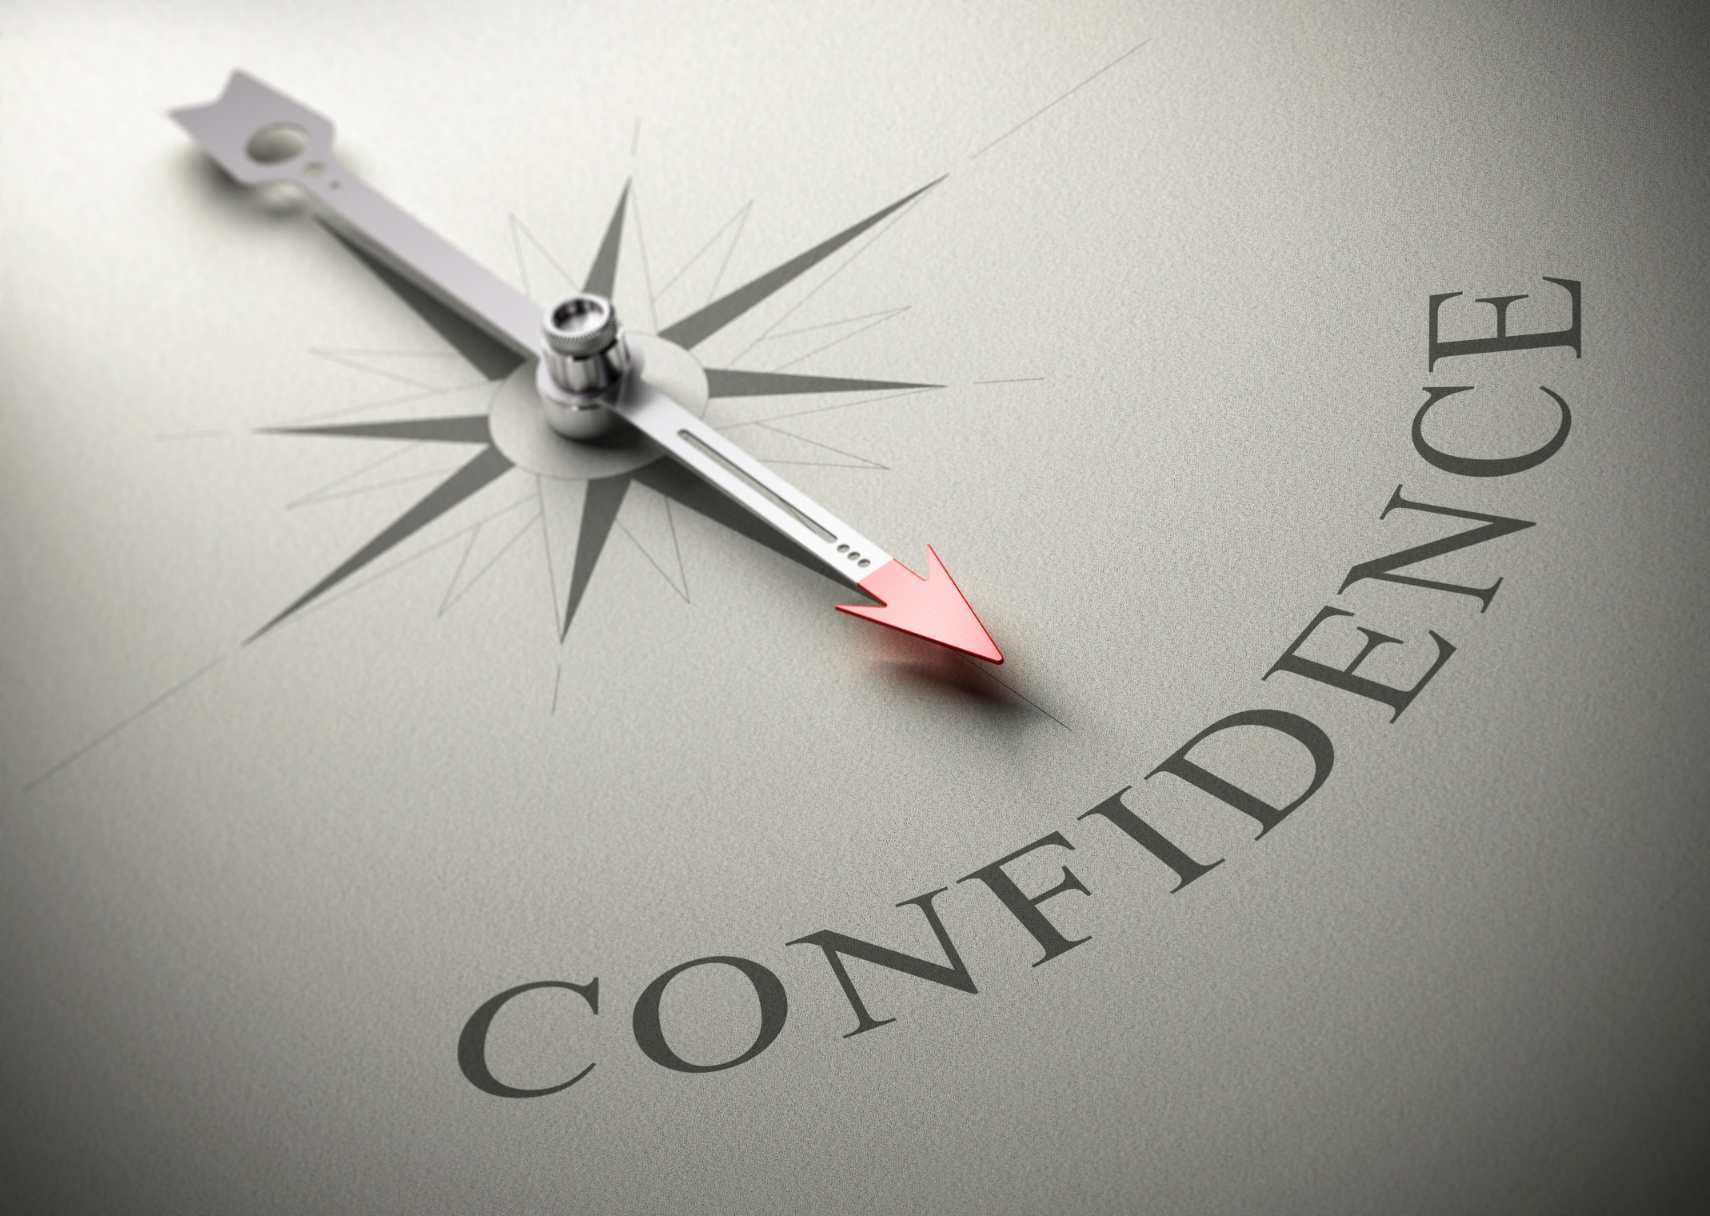 compass pointing to the word confidence